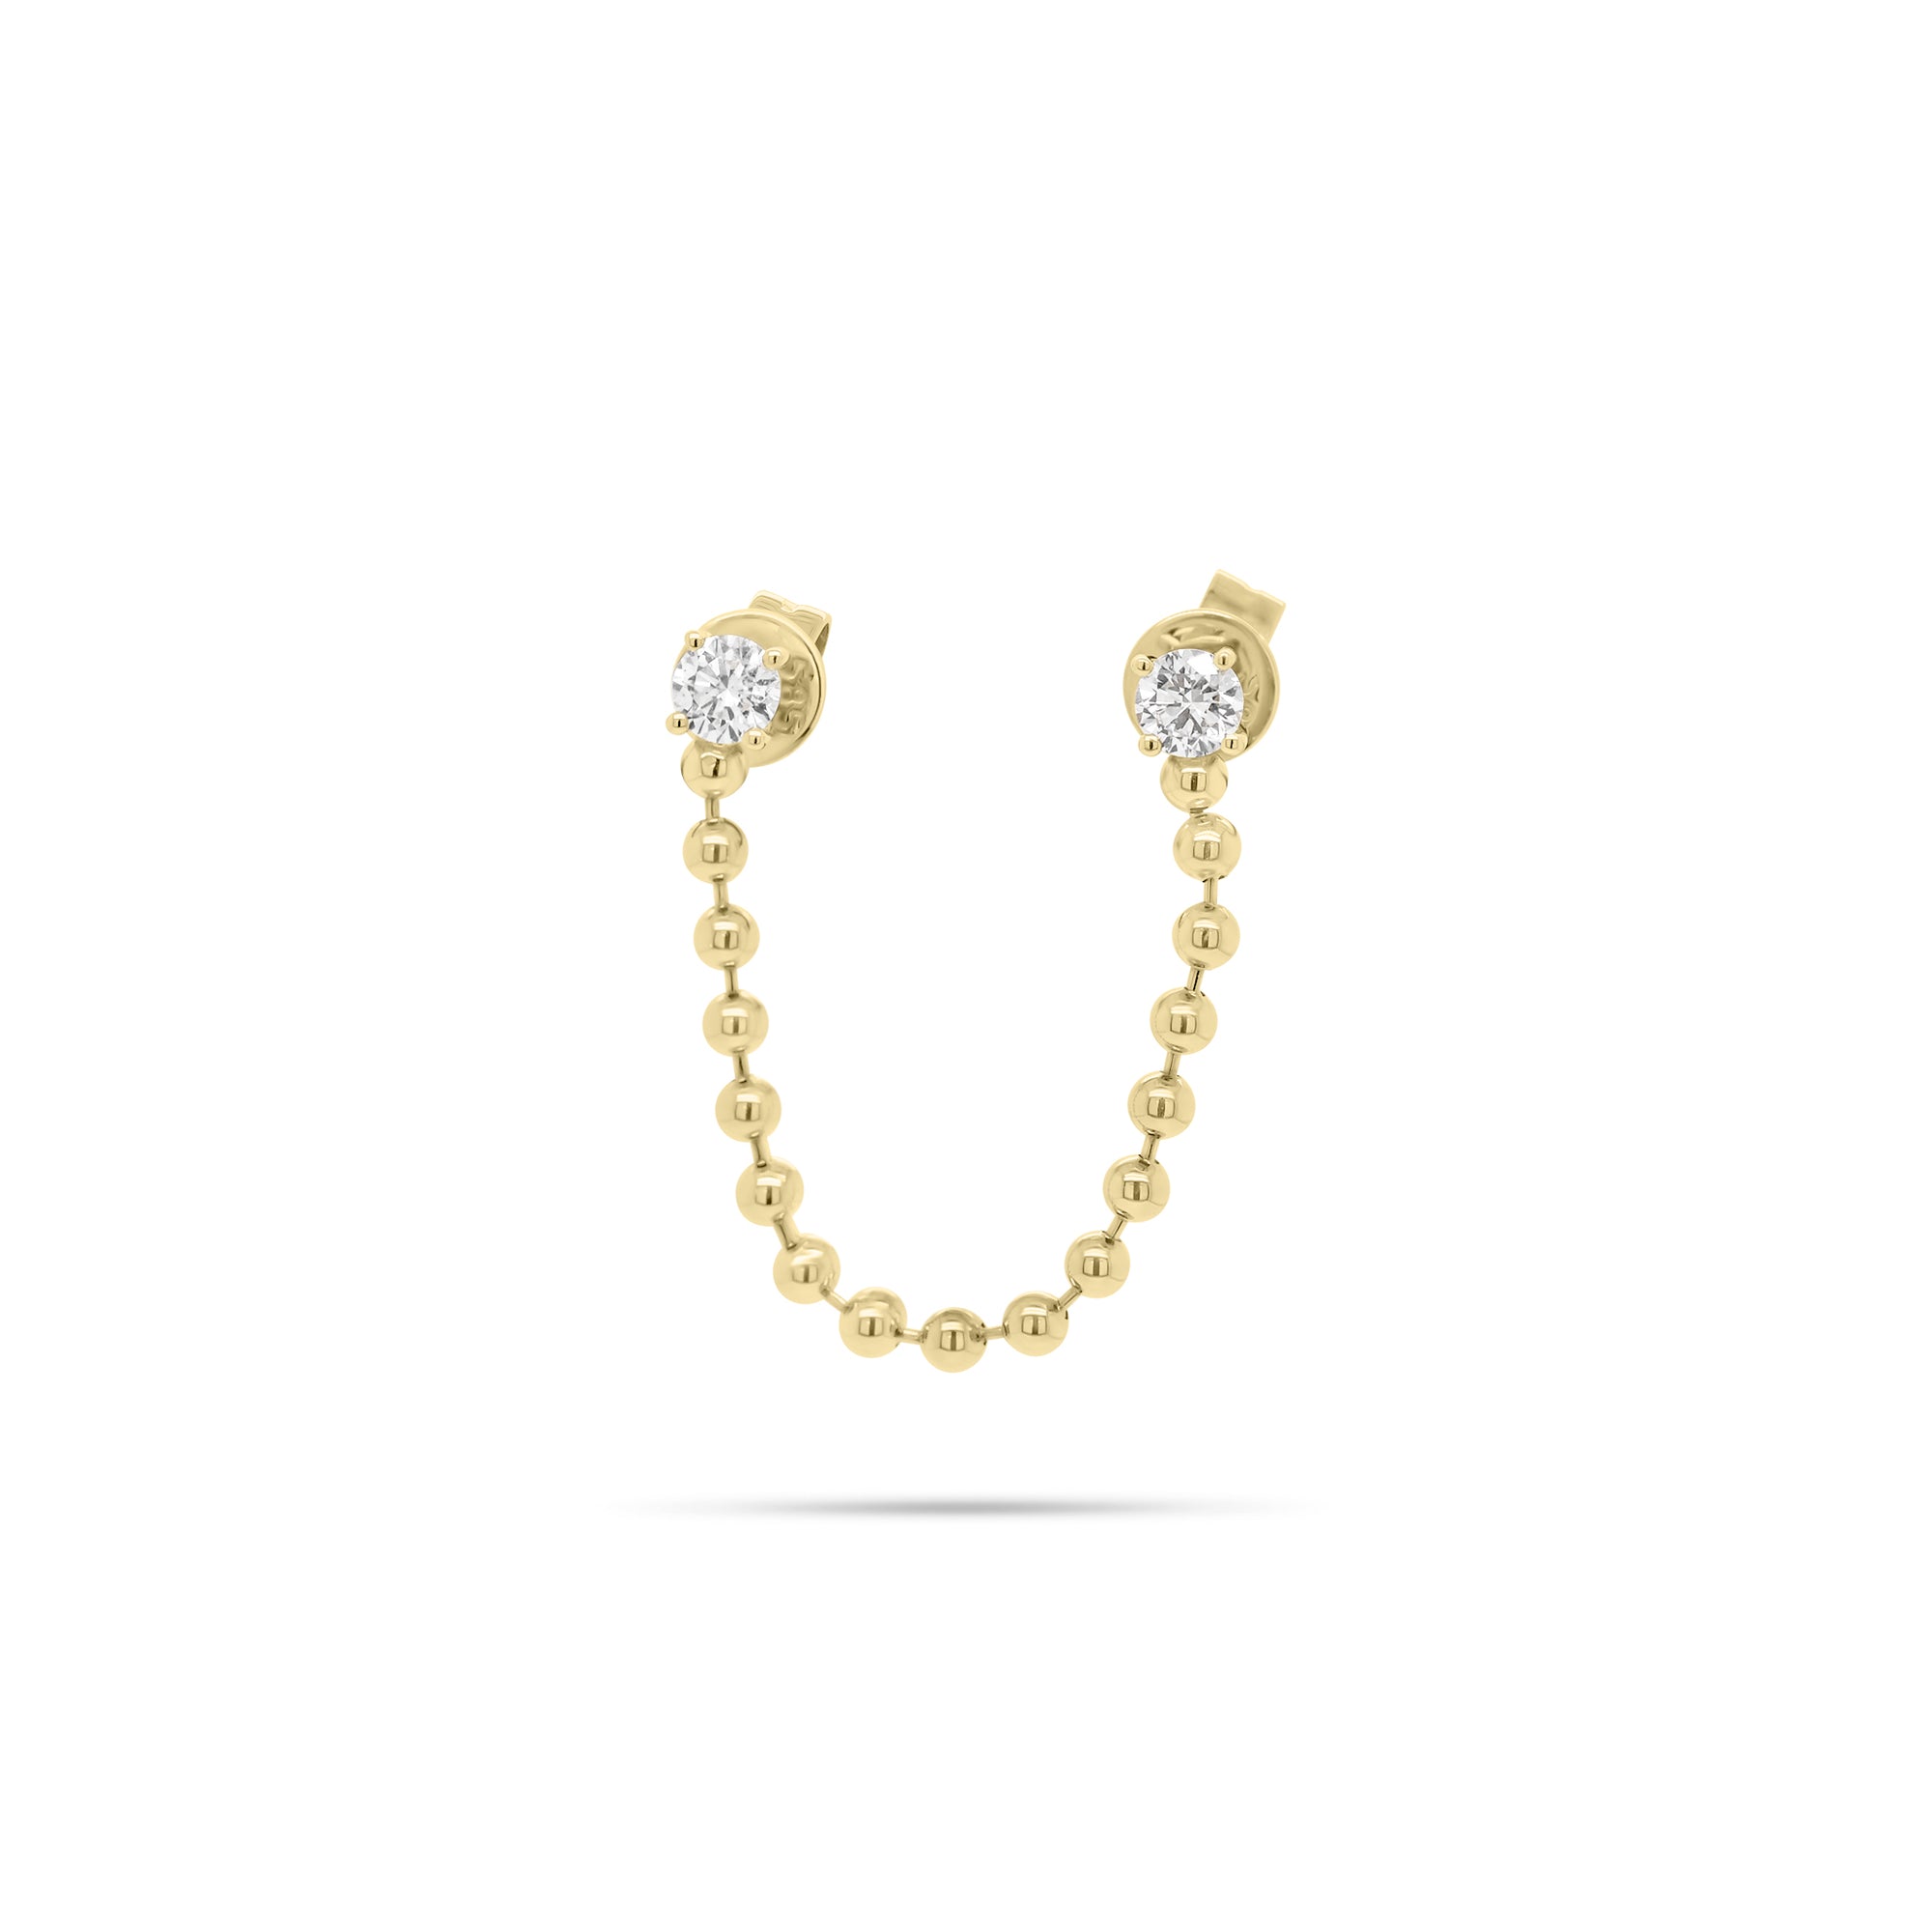 Diamond & Gold Ball Chain Double Stud Earring - 14K gold weighing 1.24 grams  - 2 round diamonds weighing 0.22 carats